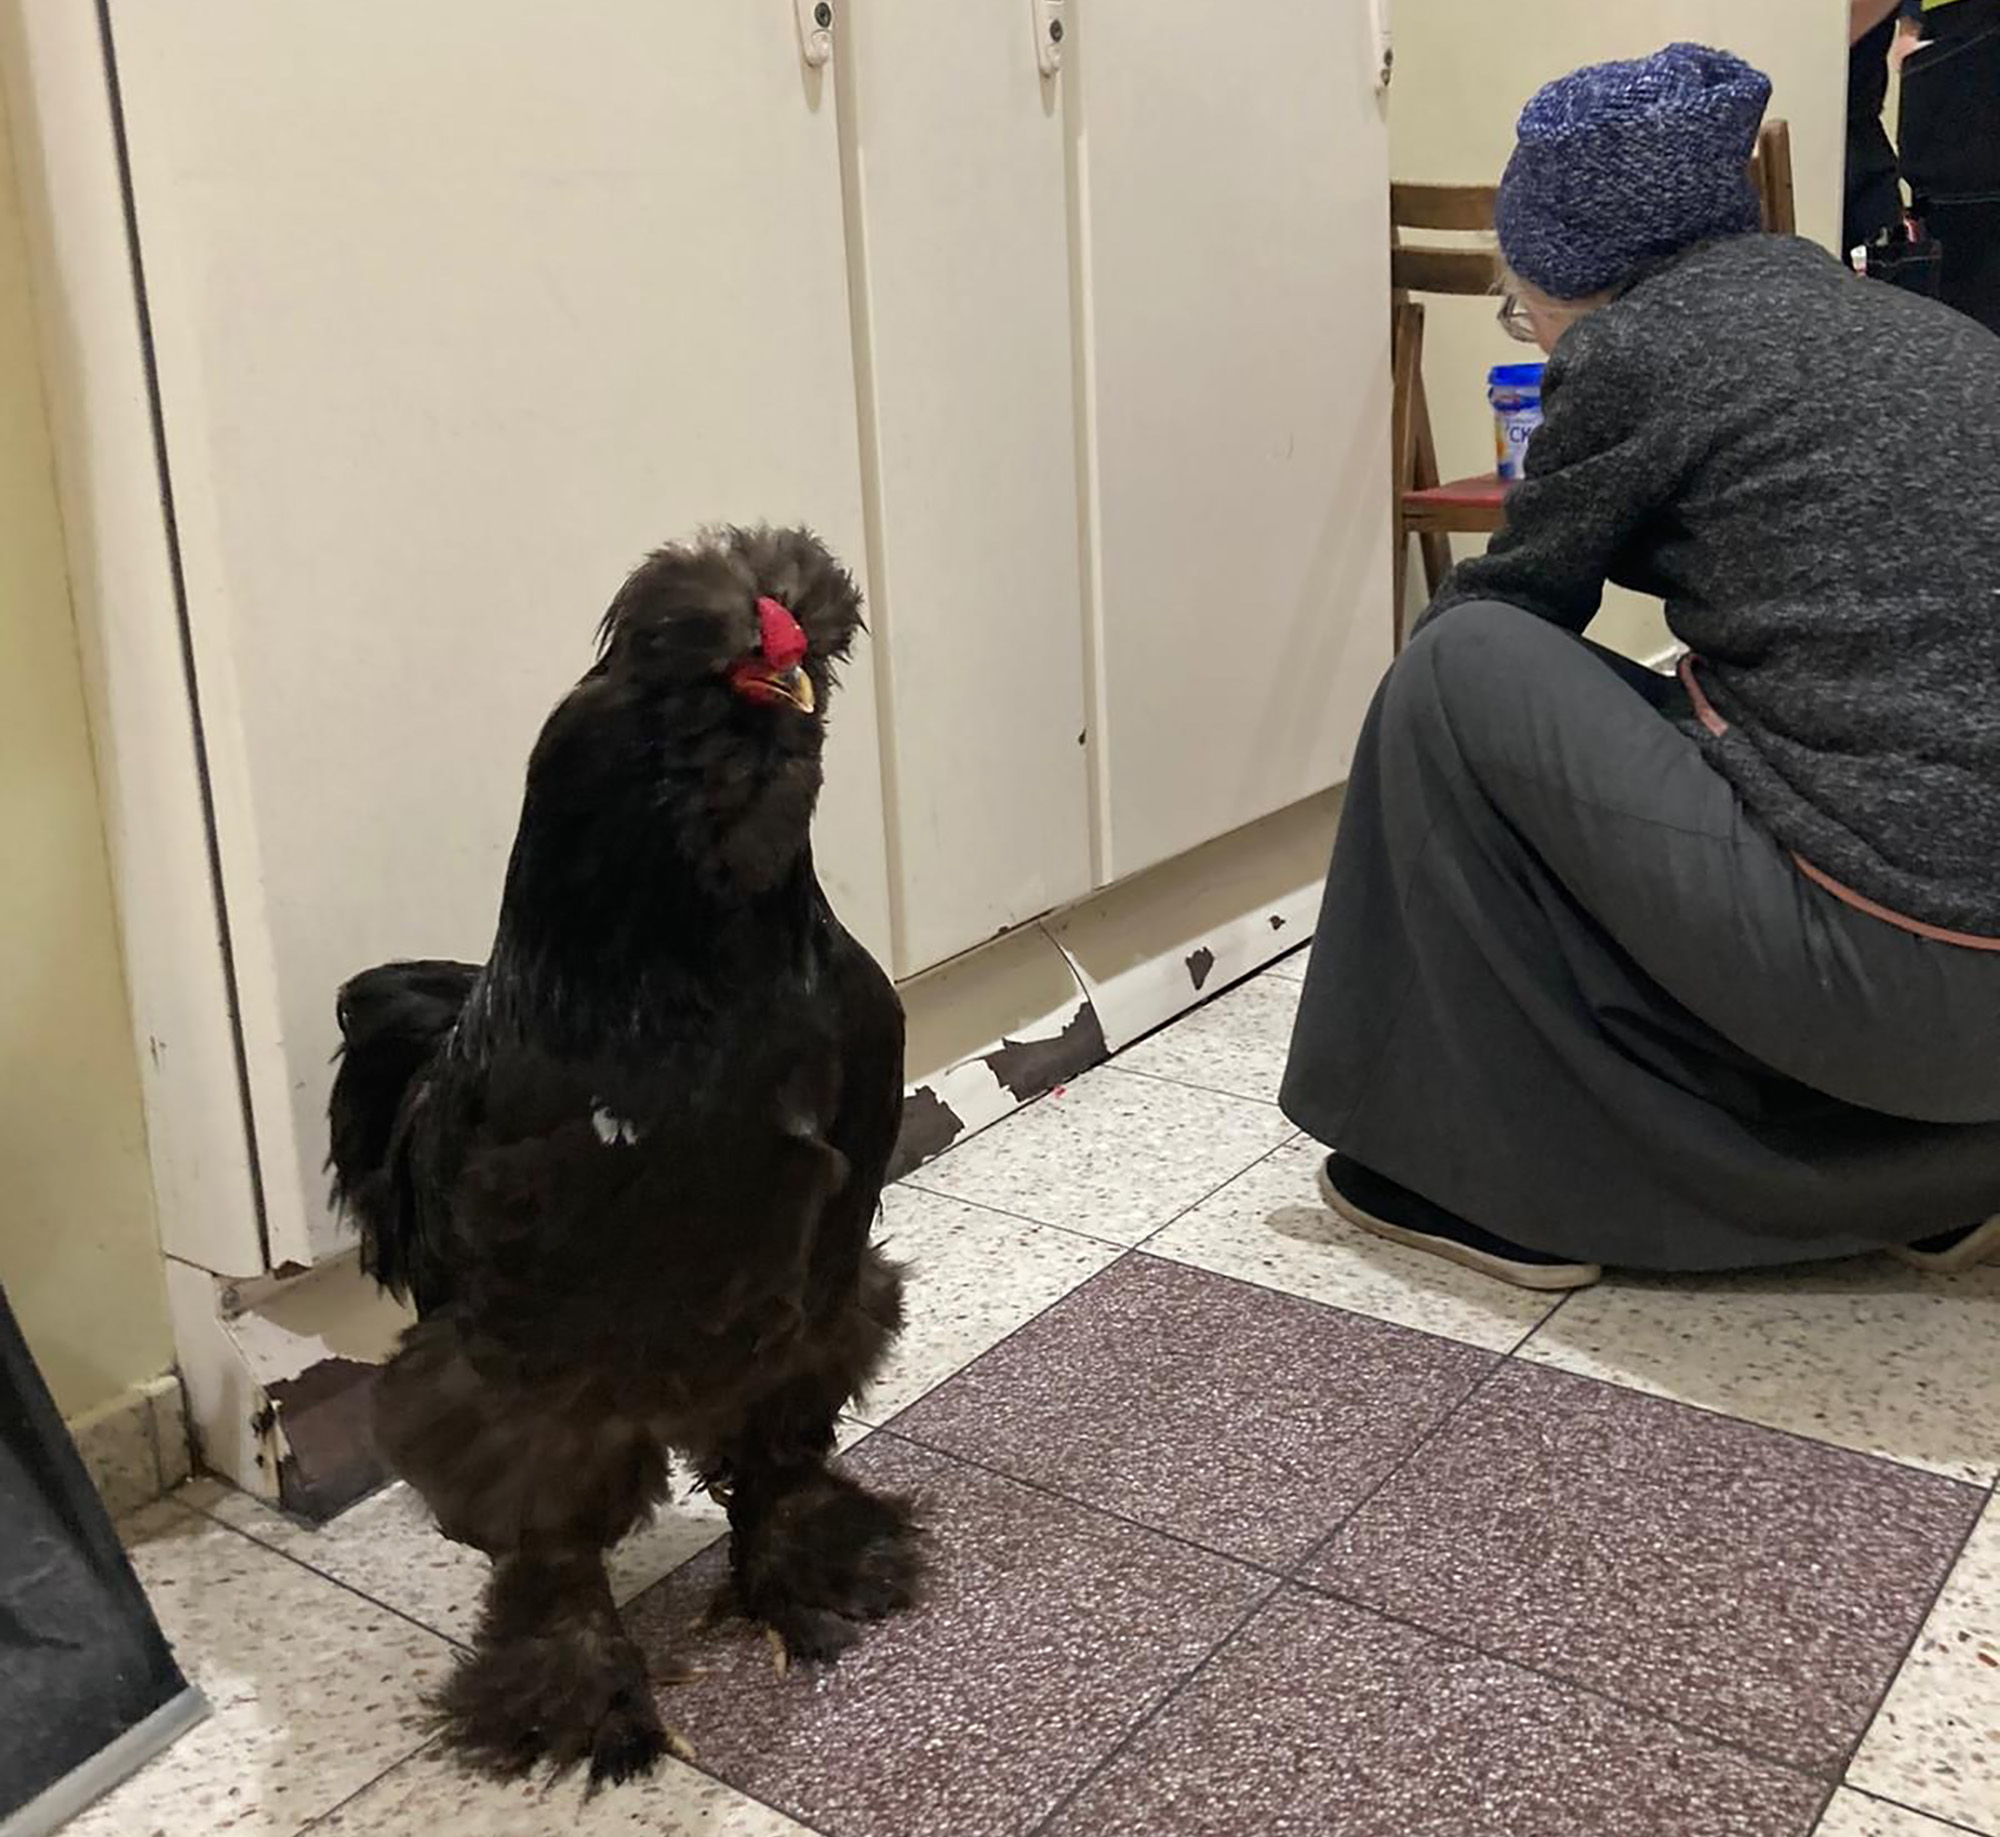 When Lyudmila and her husband Anton arrived at an evacuation center in the town of Przemysl on the Polish border with Ukraine, the rooster quickly settled in, wandering the corridors. 